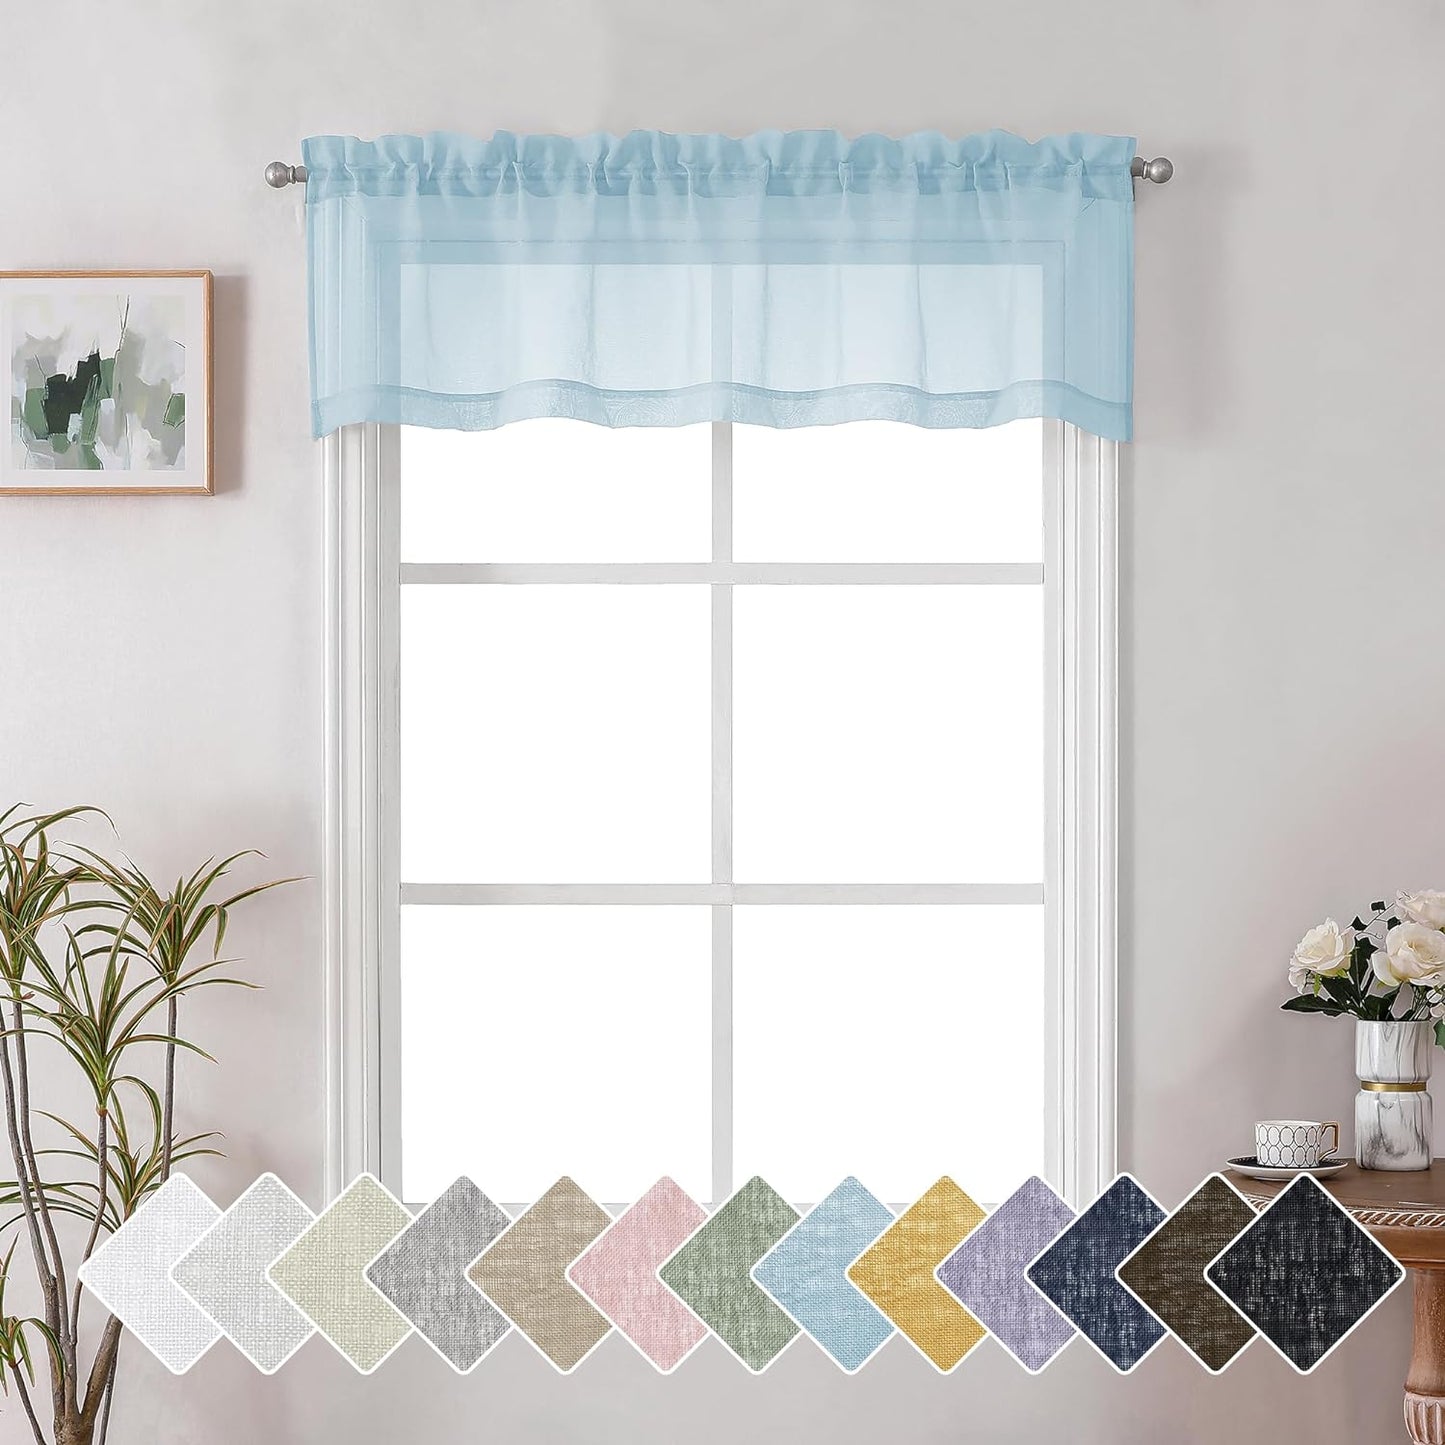 Lecloud Doris Faux Linen Sheer Grey Valance Curtains 14 Inches Length, Cafe Kitchen Bedroom Living Room Gauzy Silver Grey Curtain for Small Window, Slub Light Gray Valance Dual Rod Pockets 60X14 Inch  Lecloud Sky Blue 60 W X 14 L 